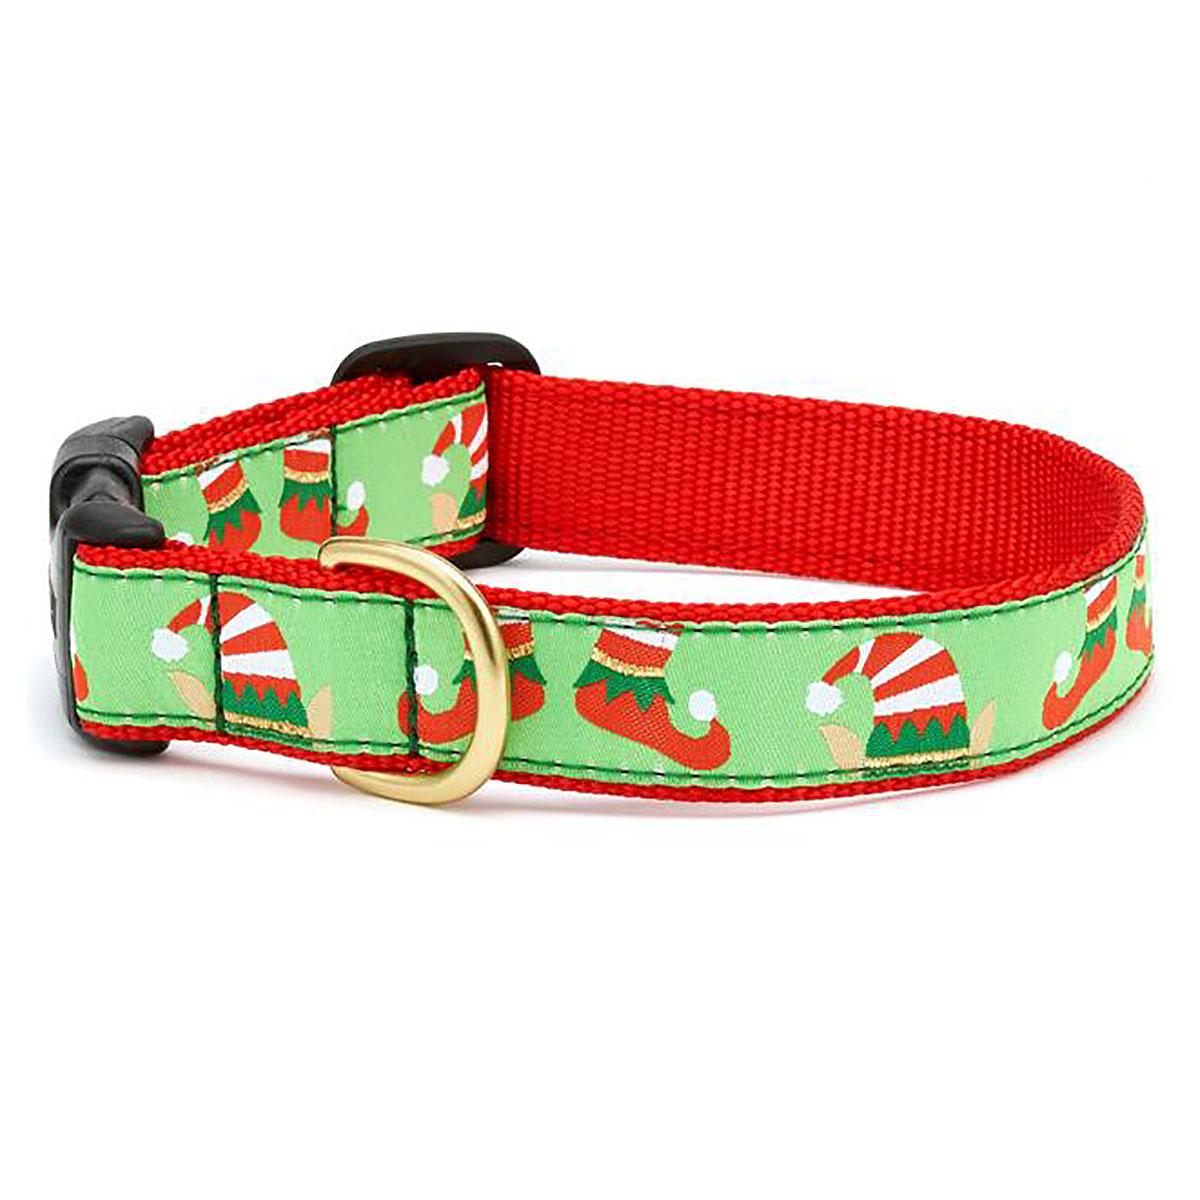 Elves Dog Collar by Up Country